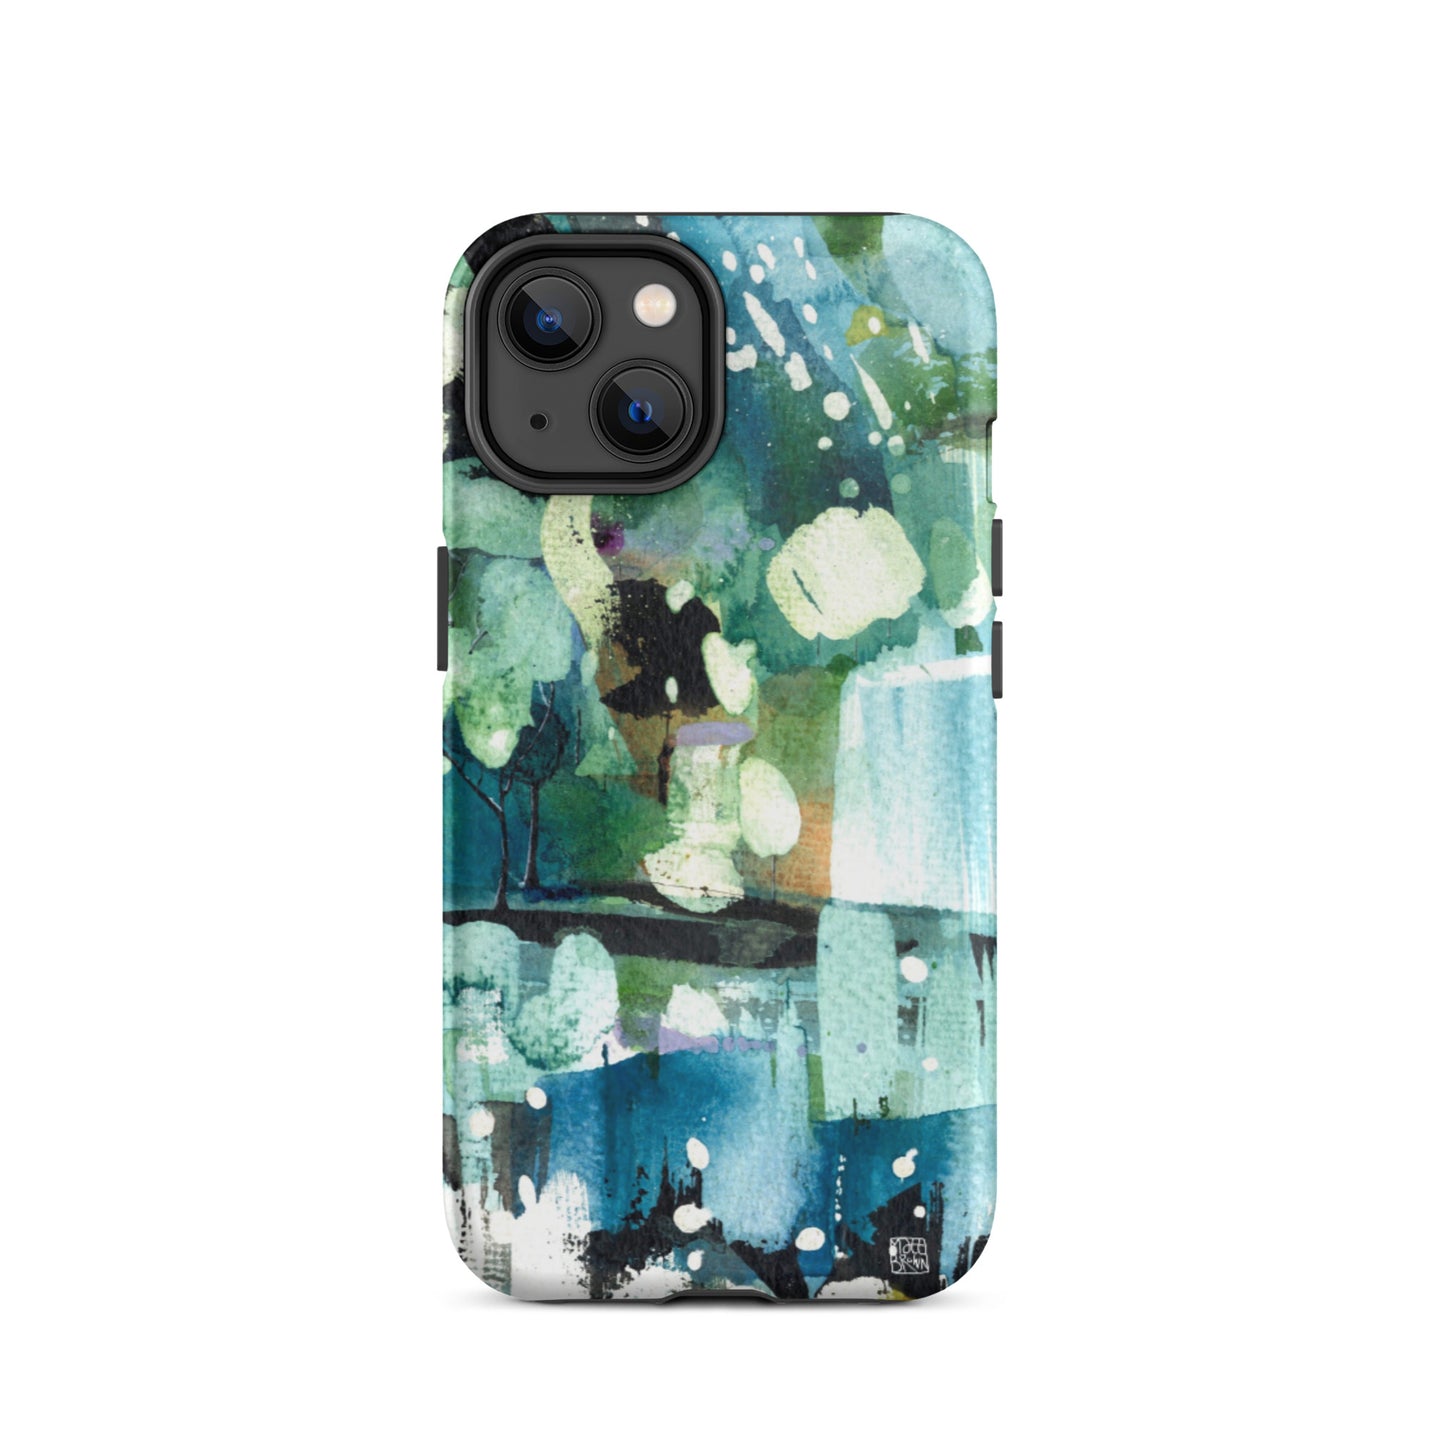 Tough iPhone Art Case - Waterfall in the Forest